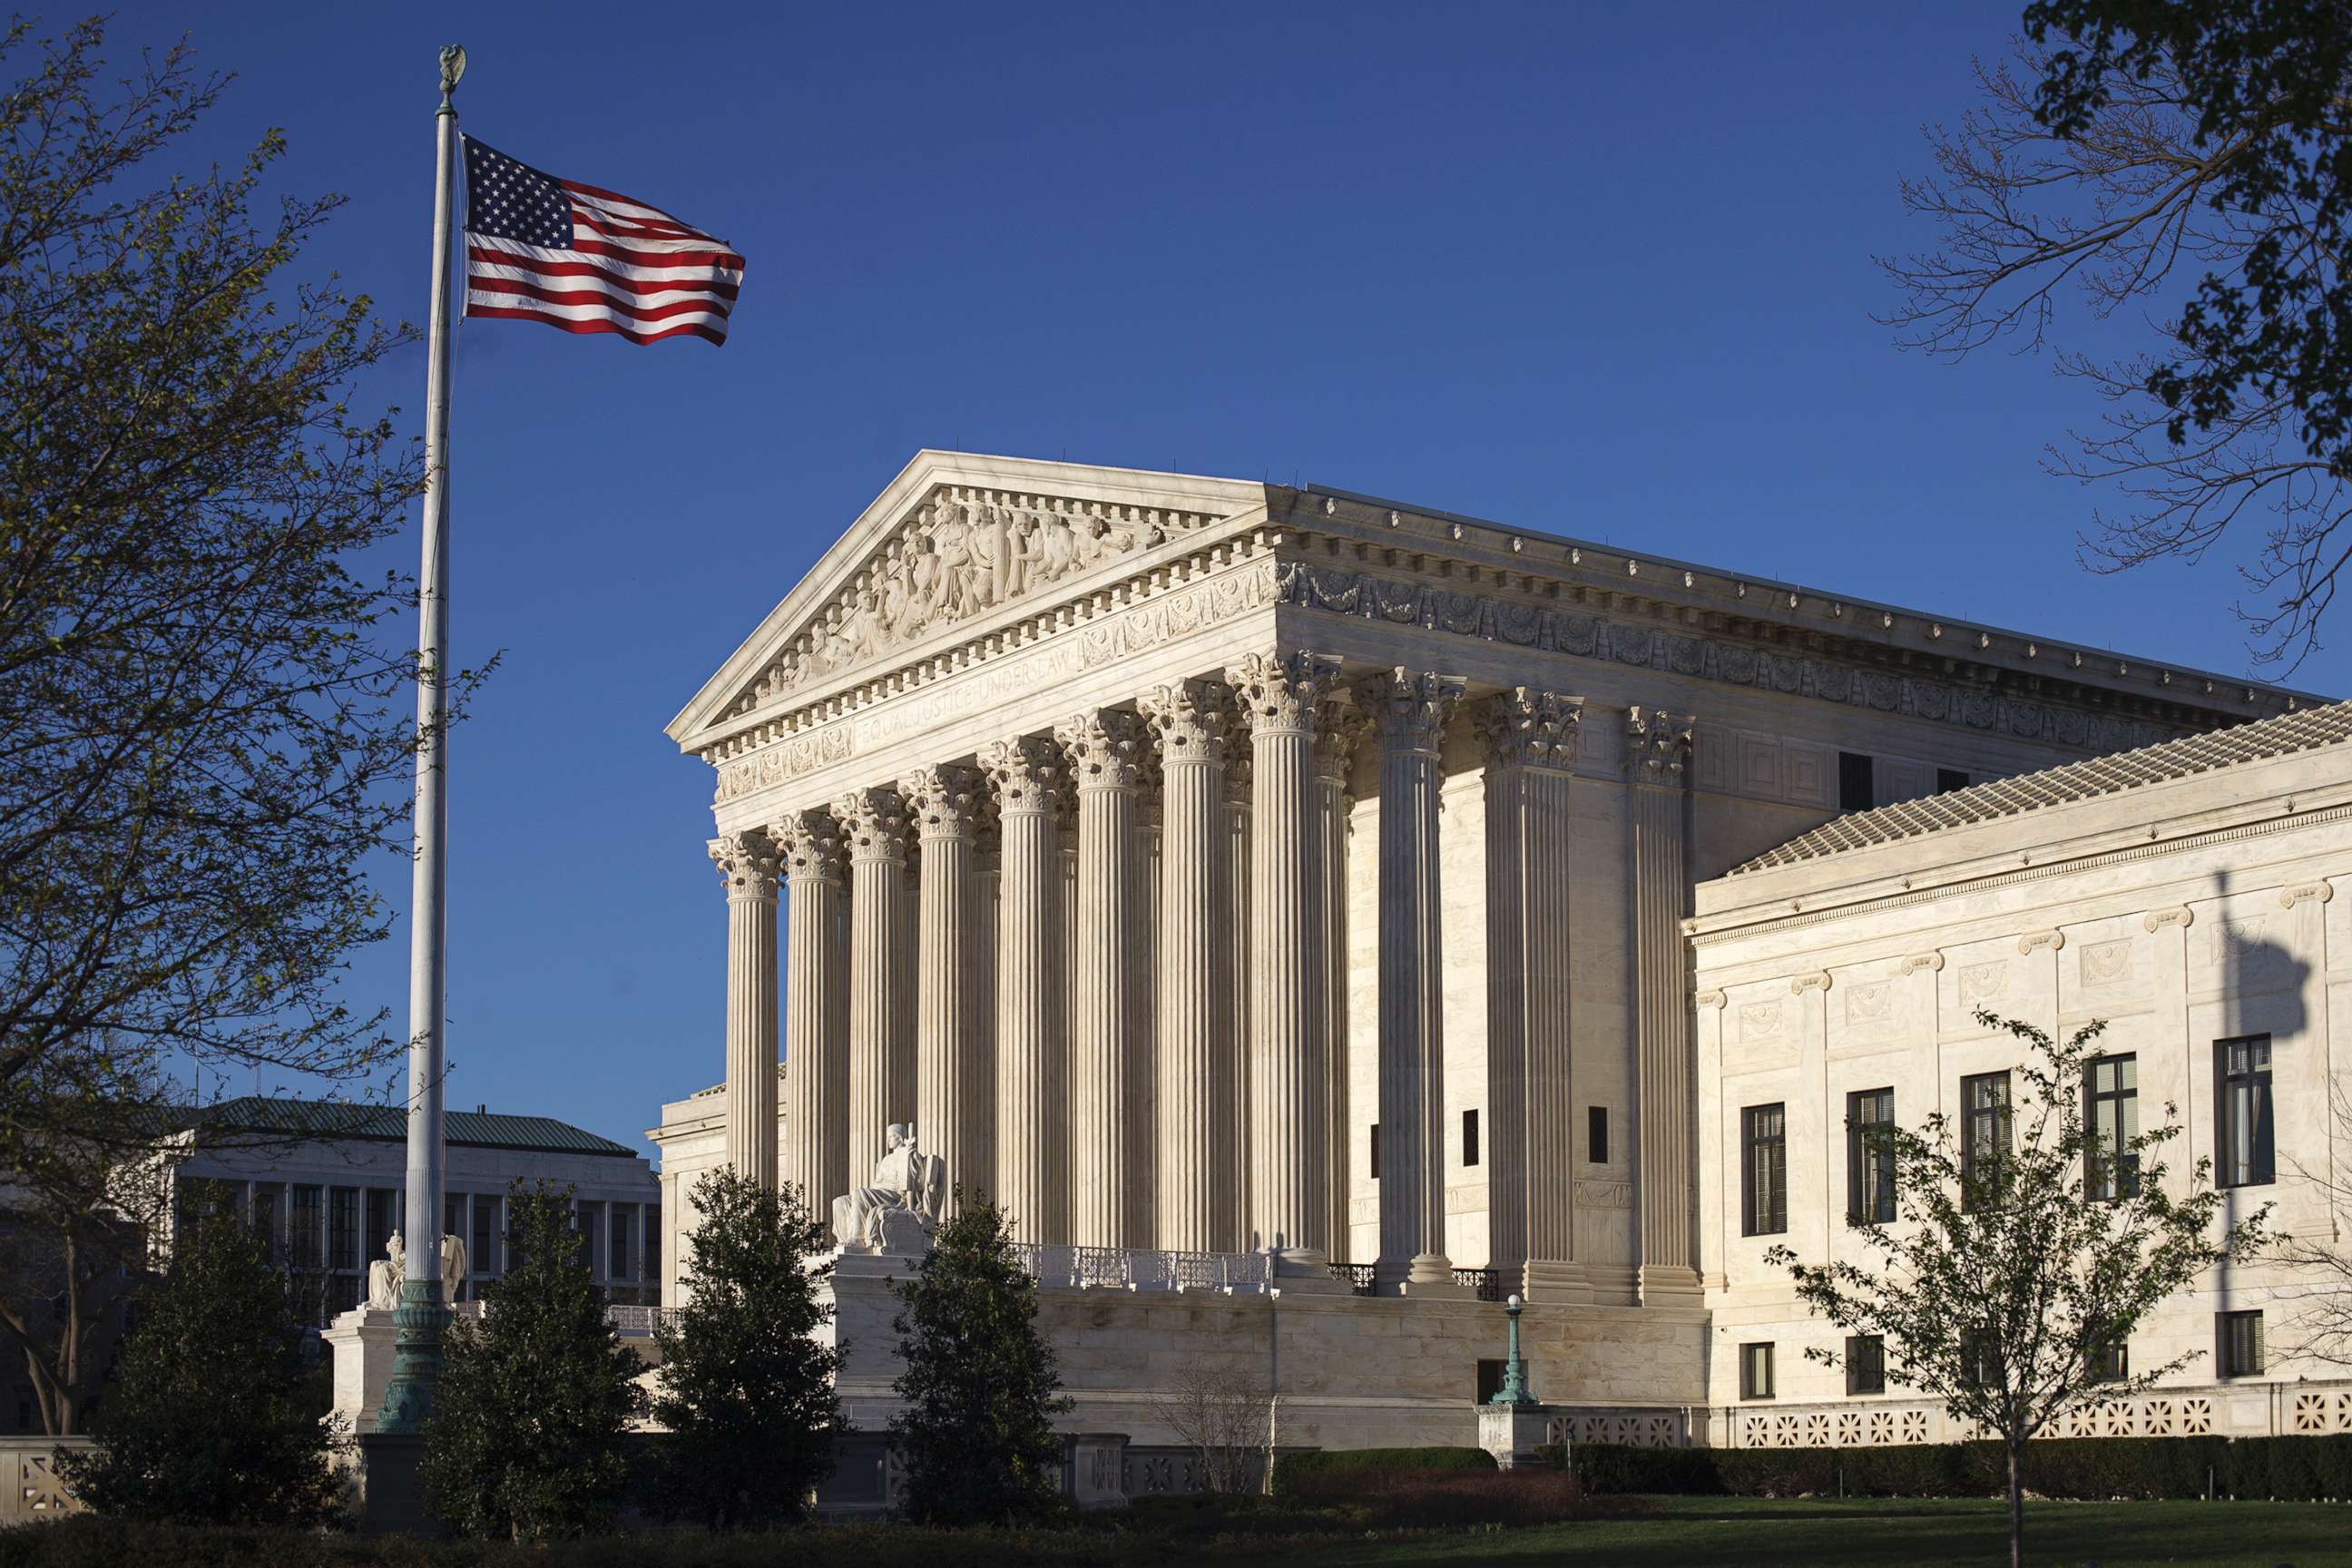 PHOTO: The Supreme Court Building in Washington, D.C. is pictured on April 4, 2017.